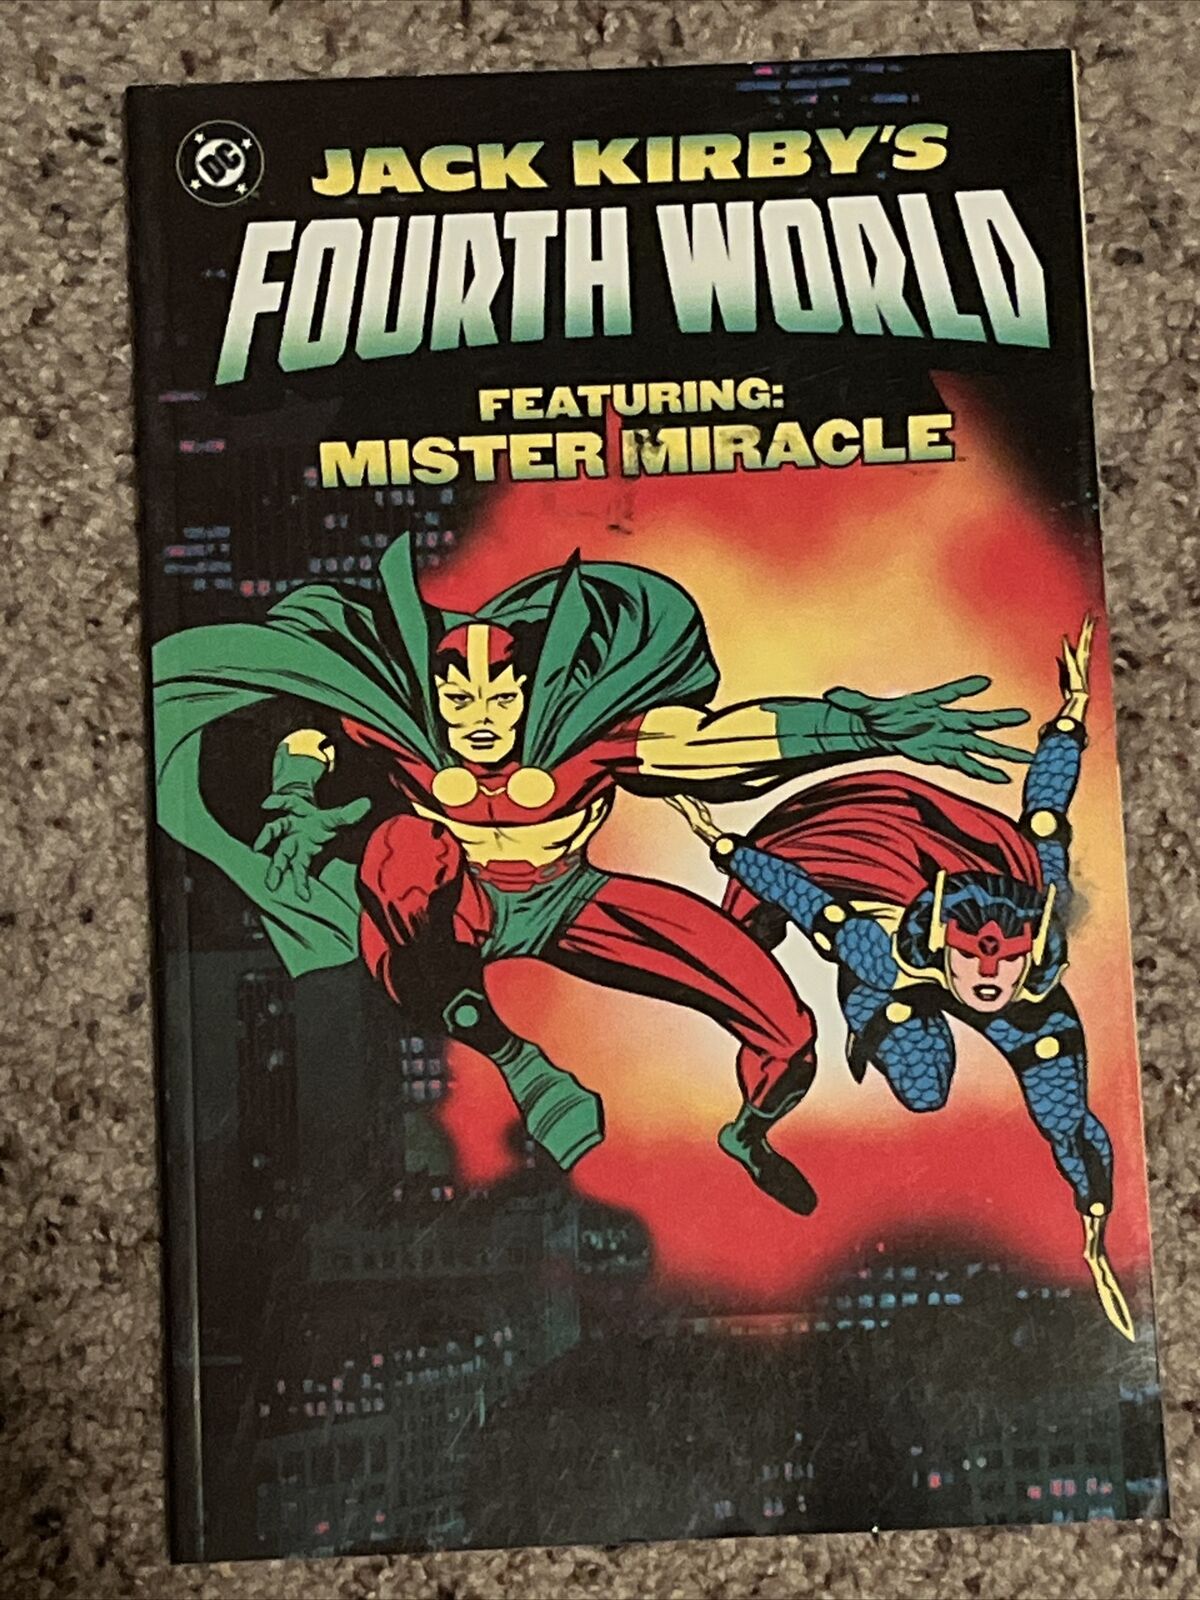 JACK KIRBY'S FOURTH WORLD : FEATURING MISTER MIRACLE. DC